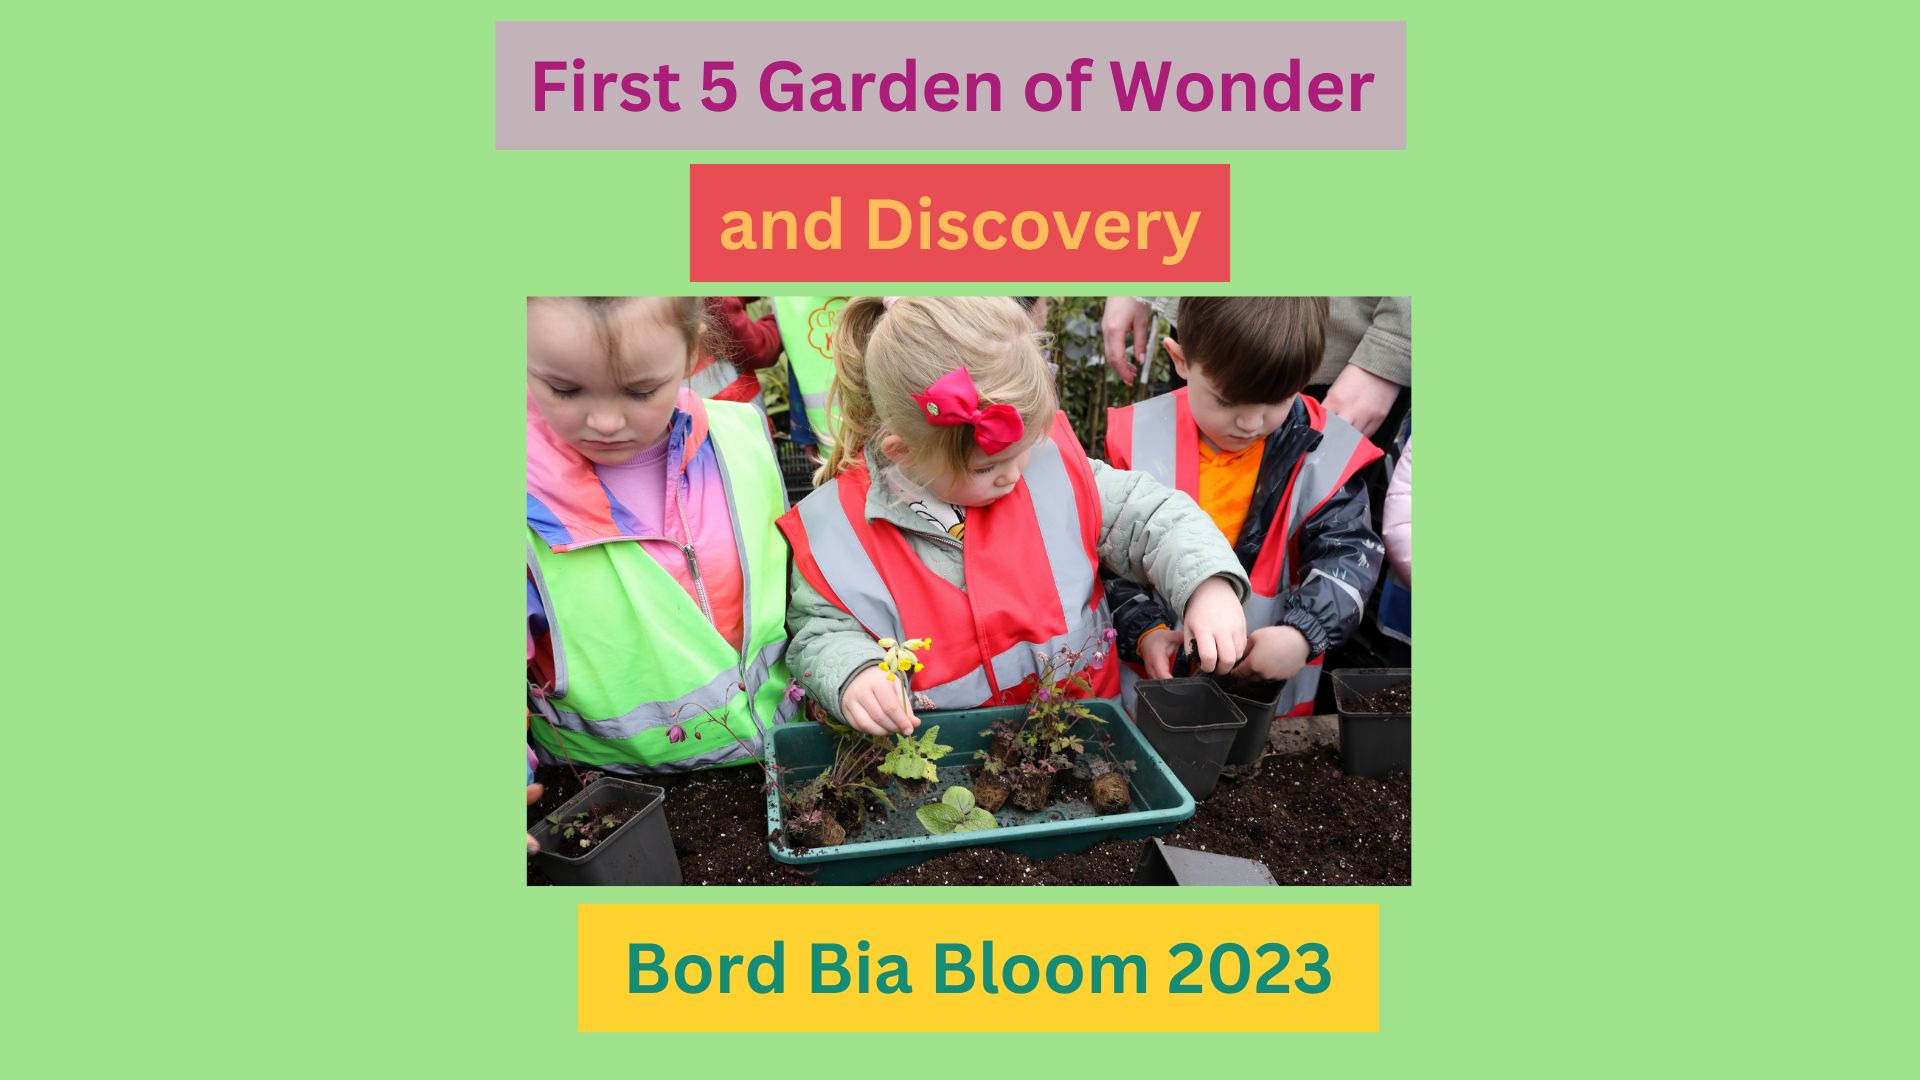 <strong>First 5 Garden of Wonder and Discovery at Bord Bia Bloom 2023</strong>